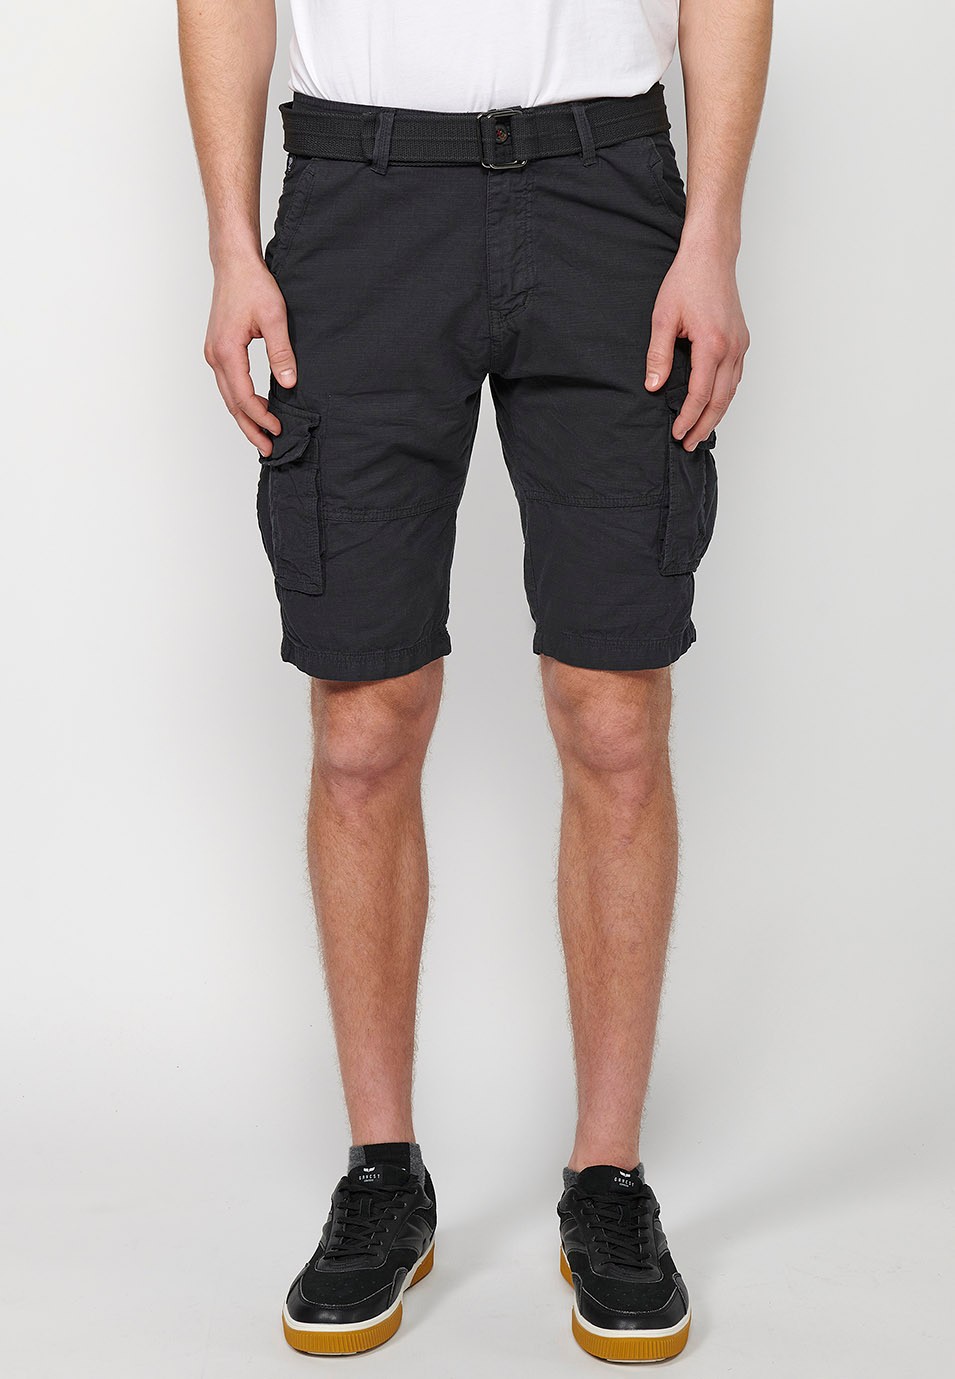 Cotton Cargo Shorts with Belt and Front Closure with Zipper and Button with Pockets, Two Back Pockets with Flap and Two Black Cargo Pants for Men 1